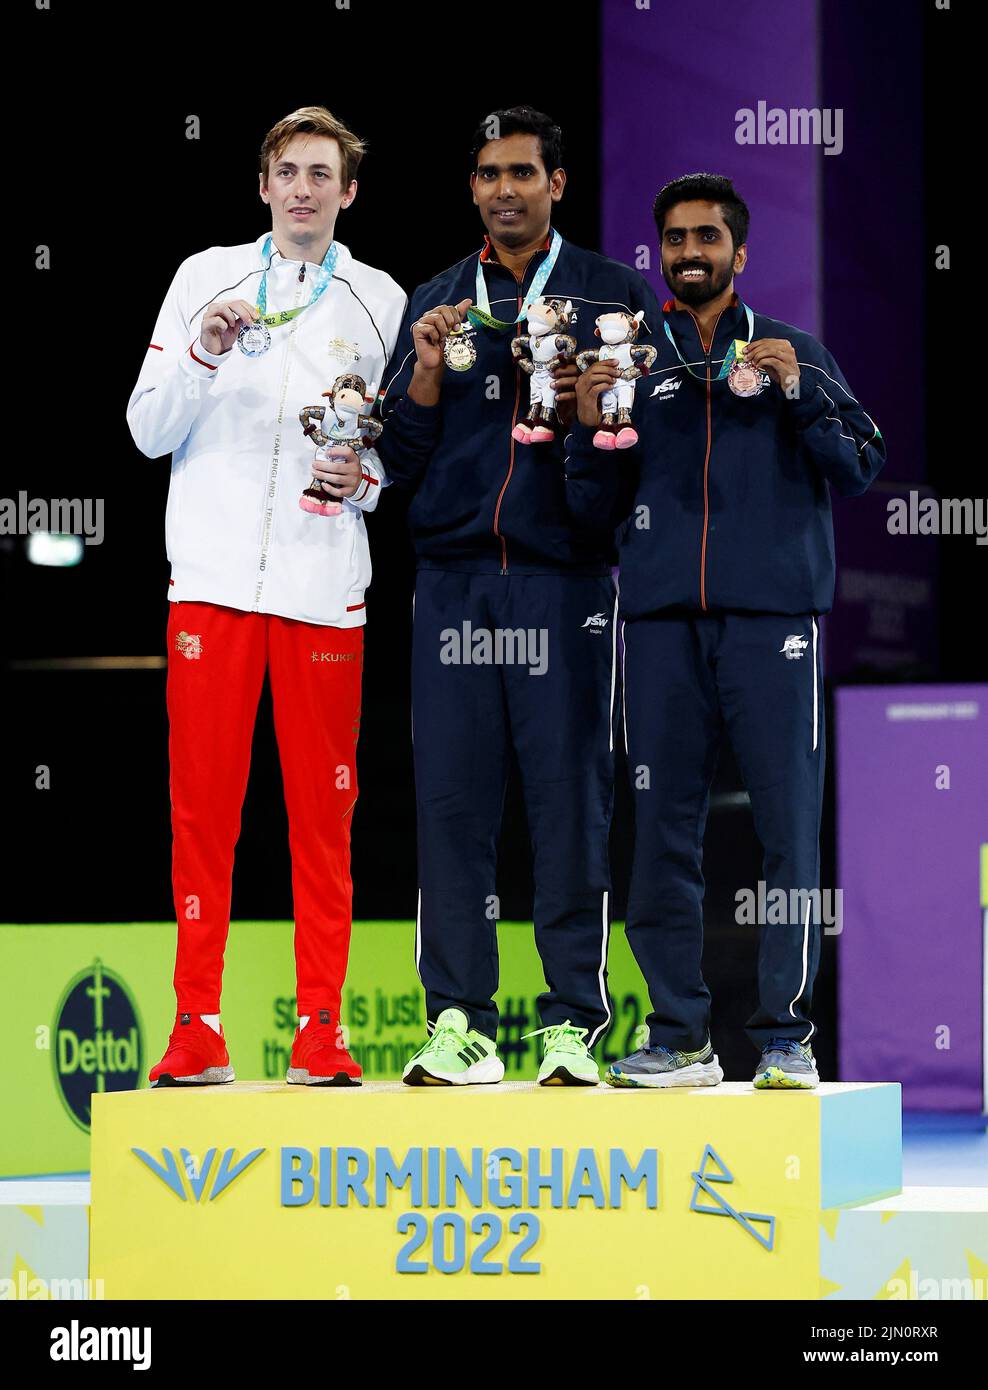 Commonwealth Games - Table Tennis - Men's Singles - Medal Ceremony - The NEC Hall 3, Birmingham, Britain - August 8, 2022 Gold medallist India's Sharath Kamal Achanta celebrates on the podium alongside silver medallist England's Liam Pitchford and bronze medallist India's Sathiyan Gnanasekaran during the medal ceremony REUTERS/Jason Cairnduff Stock Photo